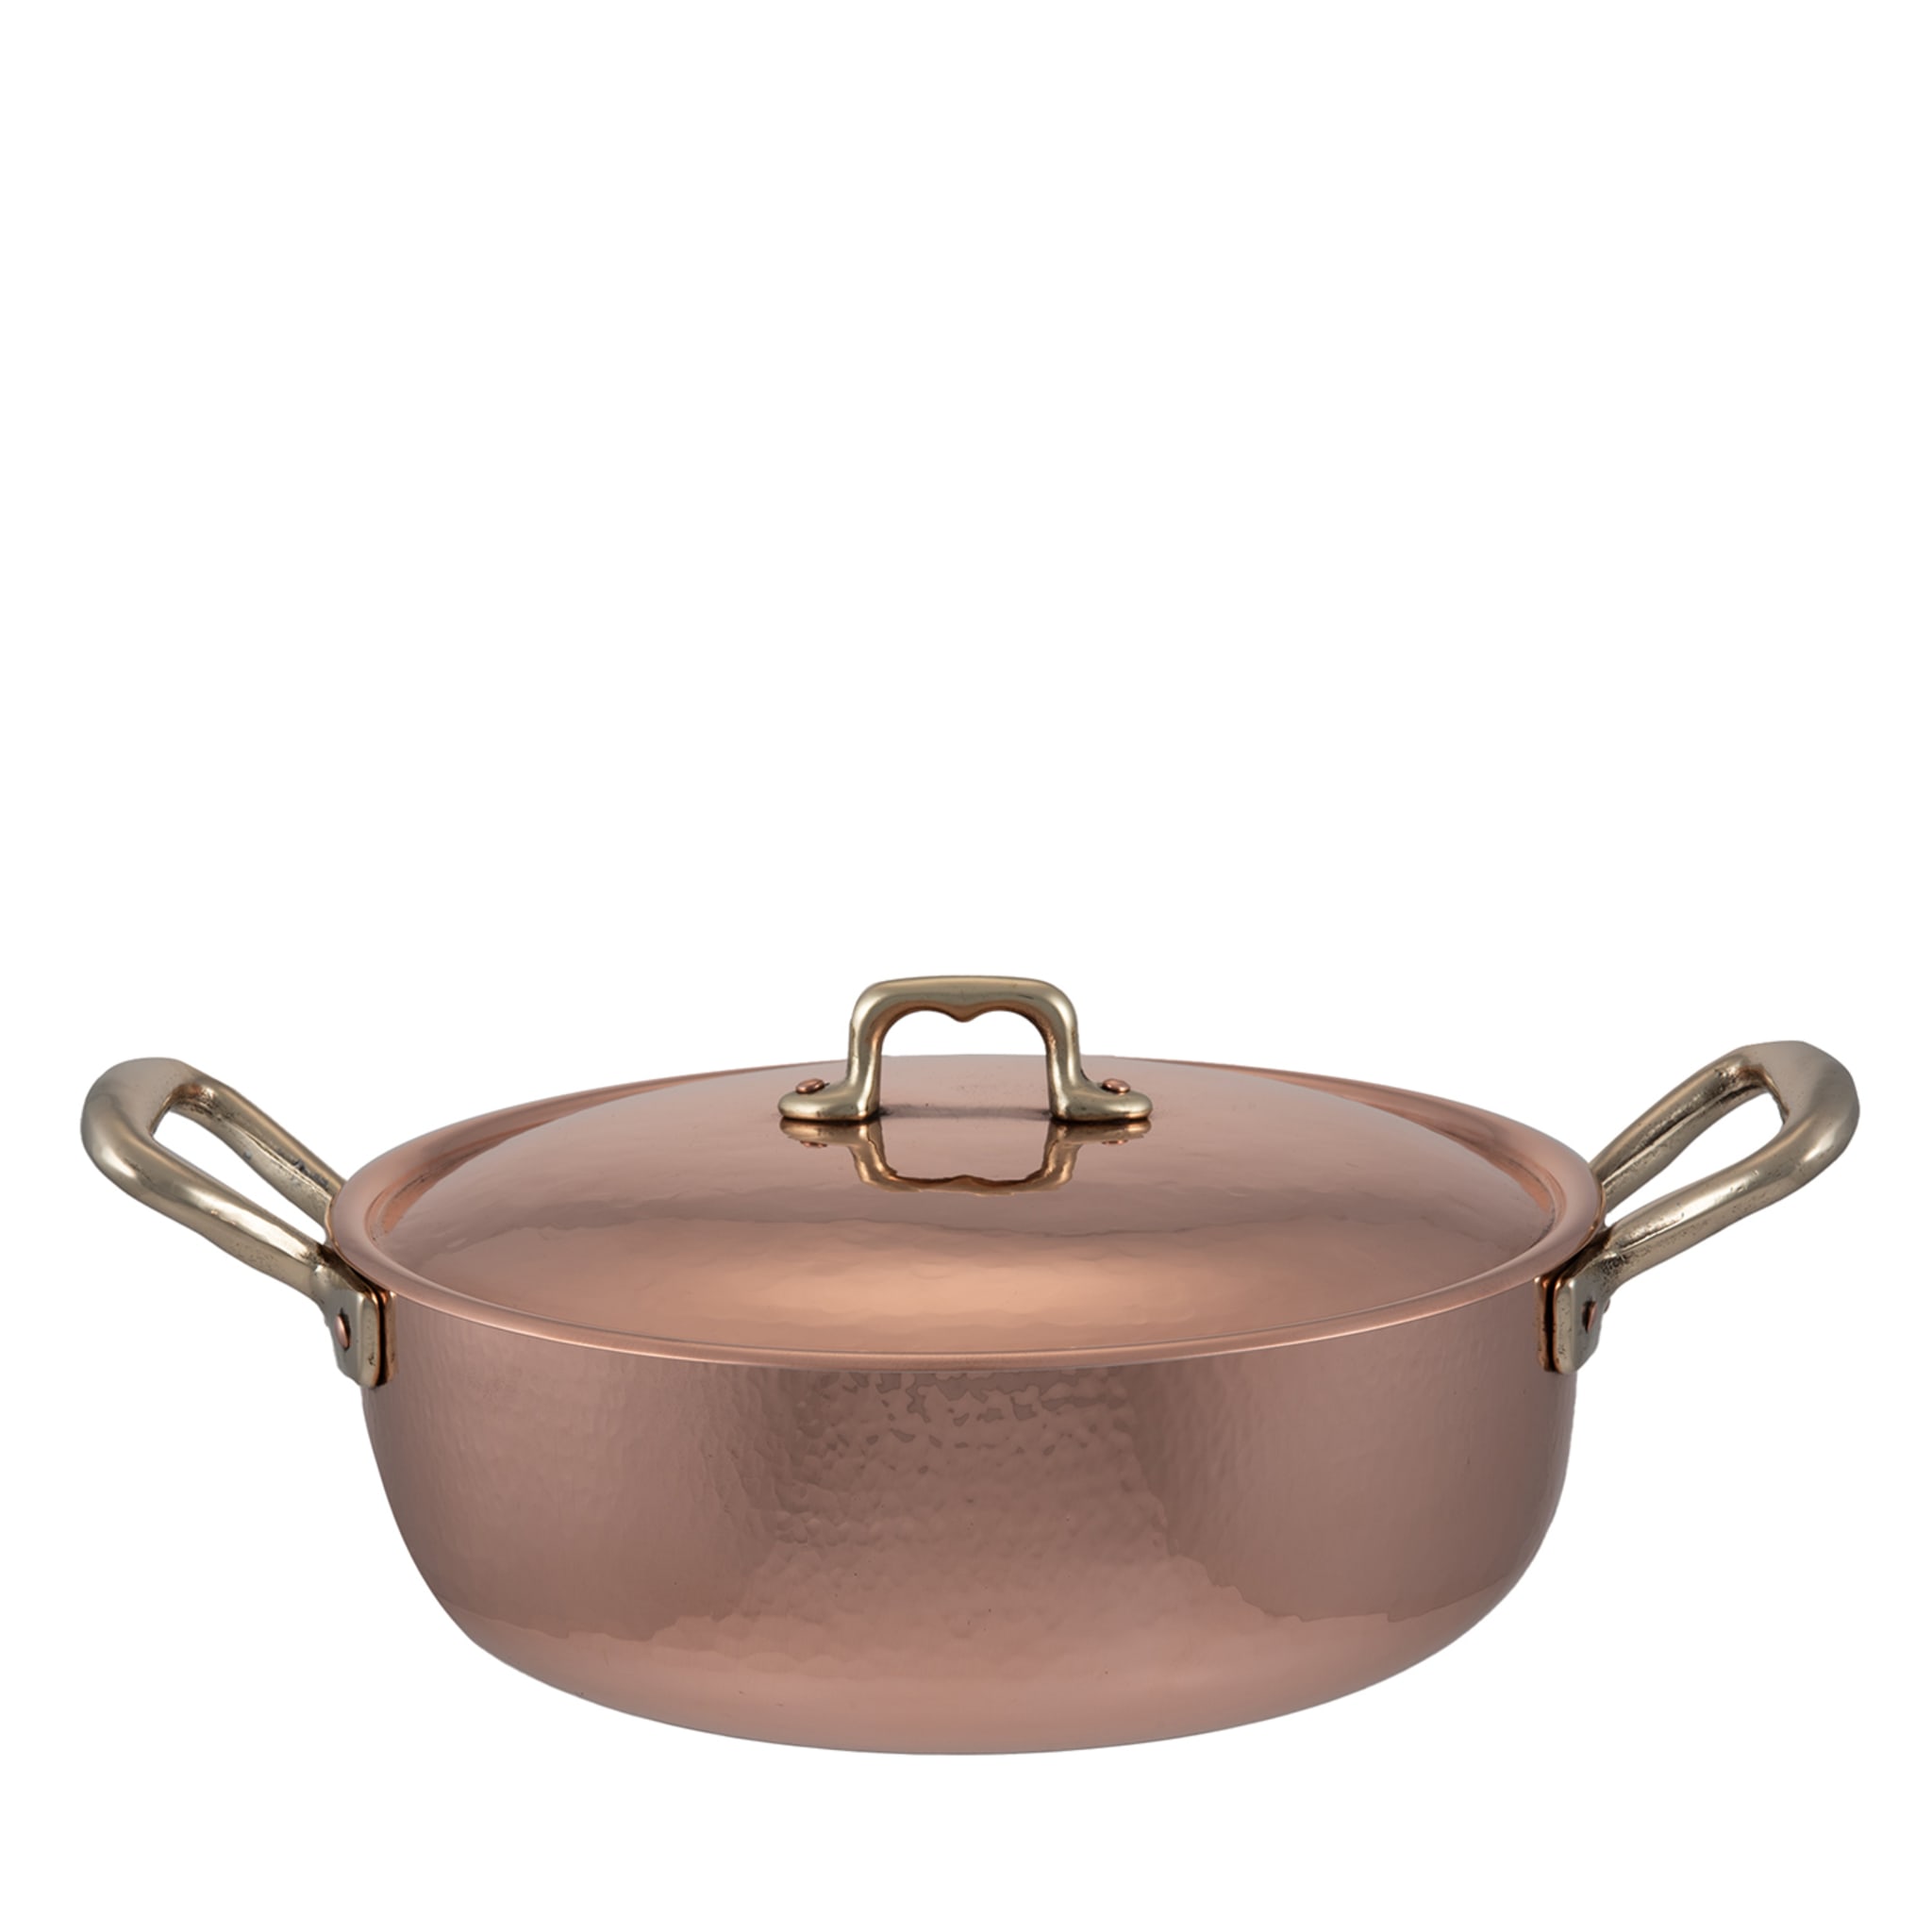 2-Handle Copper Pot with Lid - Main view